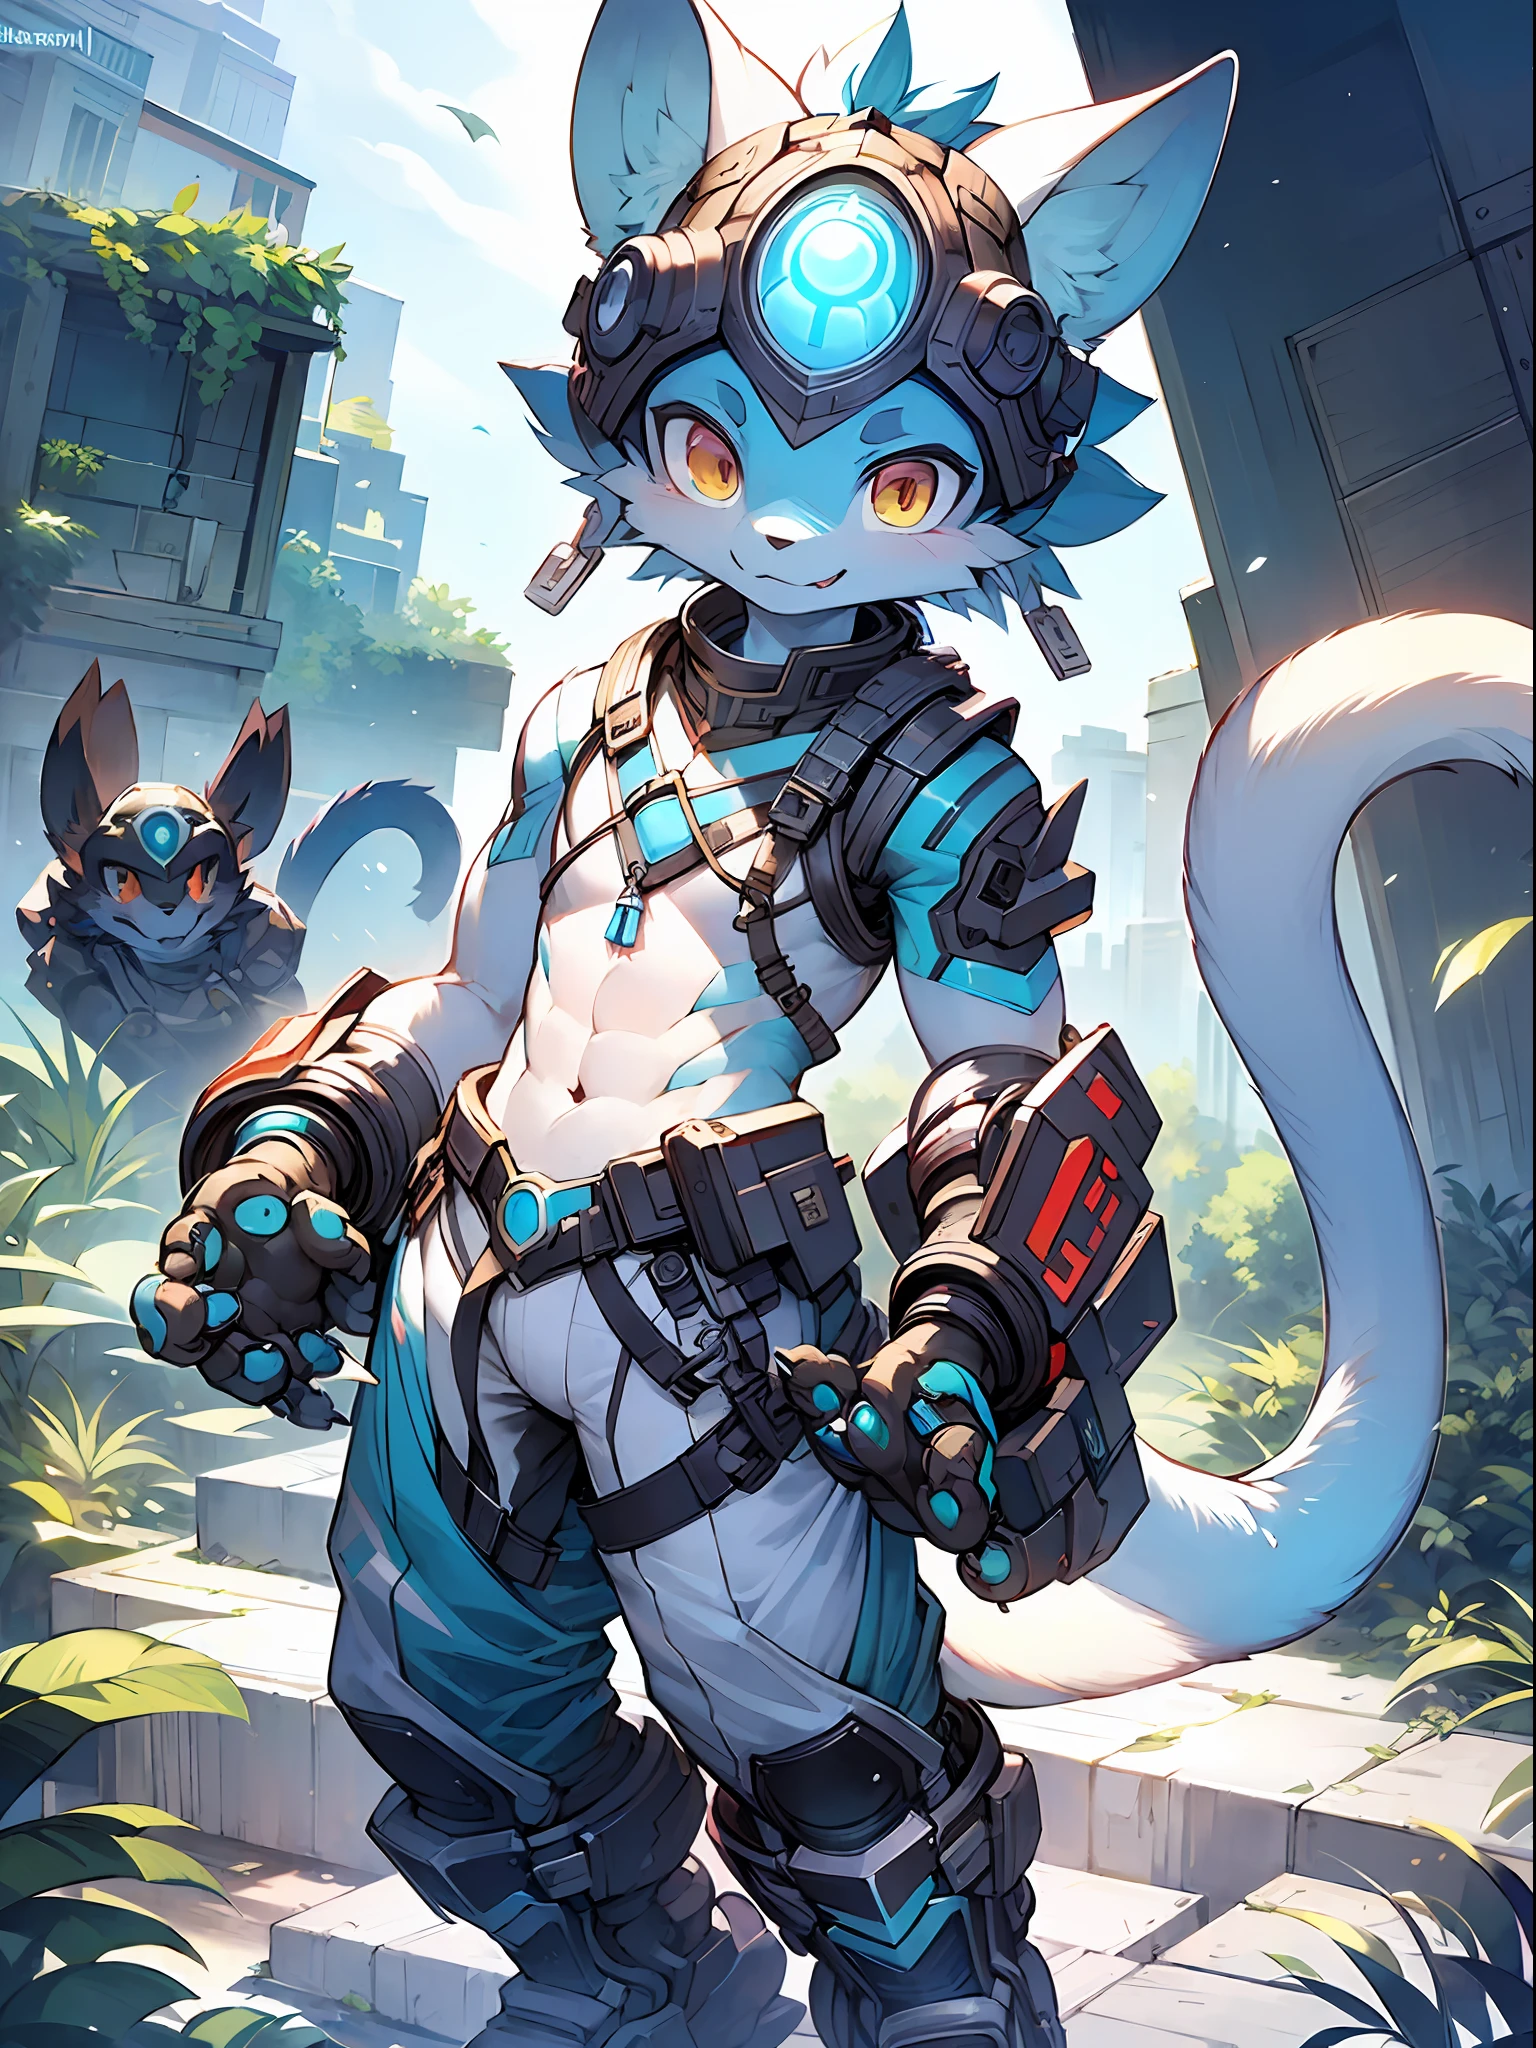 anime character with a cat like body and a helmet, trending on artstation pixiv, ( ( character concept art ) ), anthro gecko, male robotic anthro dragon, anthro cat, high quality digital concept art, professional concept art, detailed fanart, pixiv contest winner, an anthro cat, anthro art, official character art, mecha asthetic